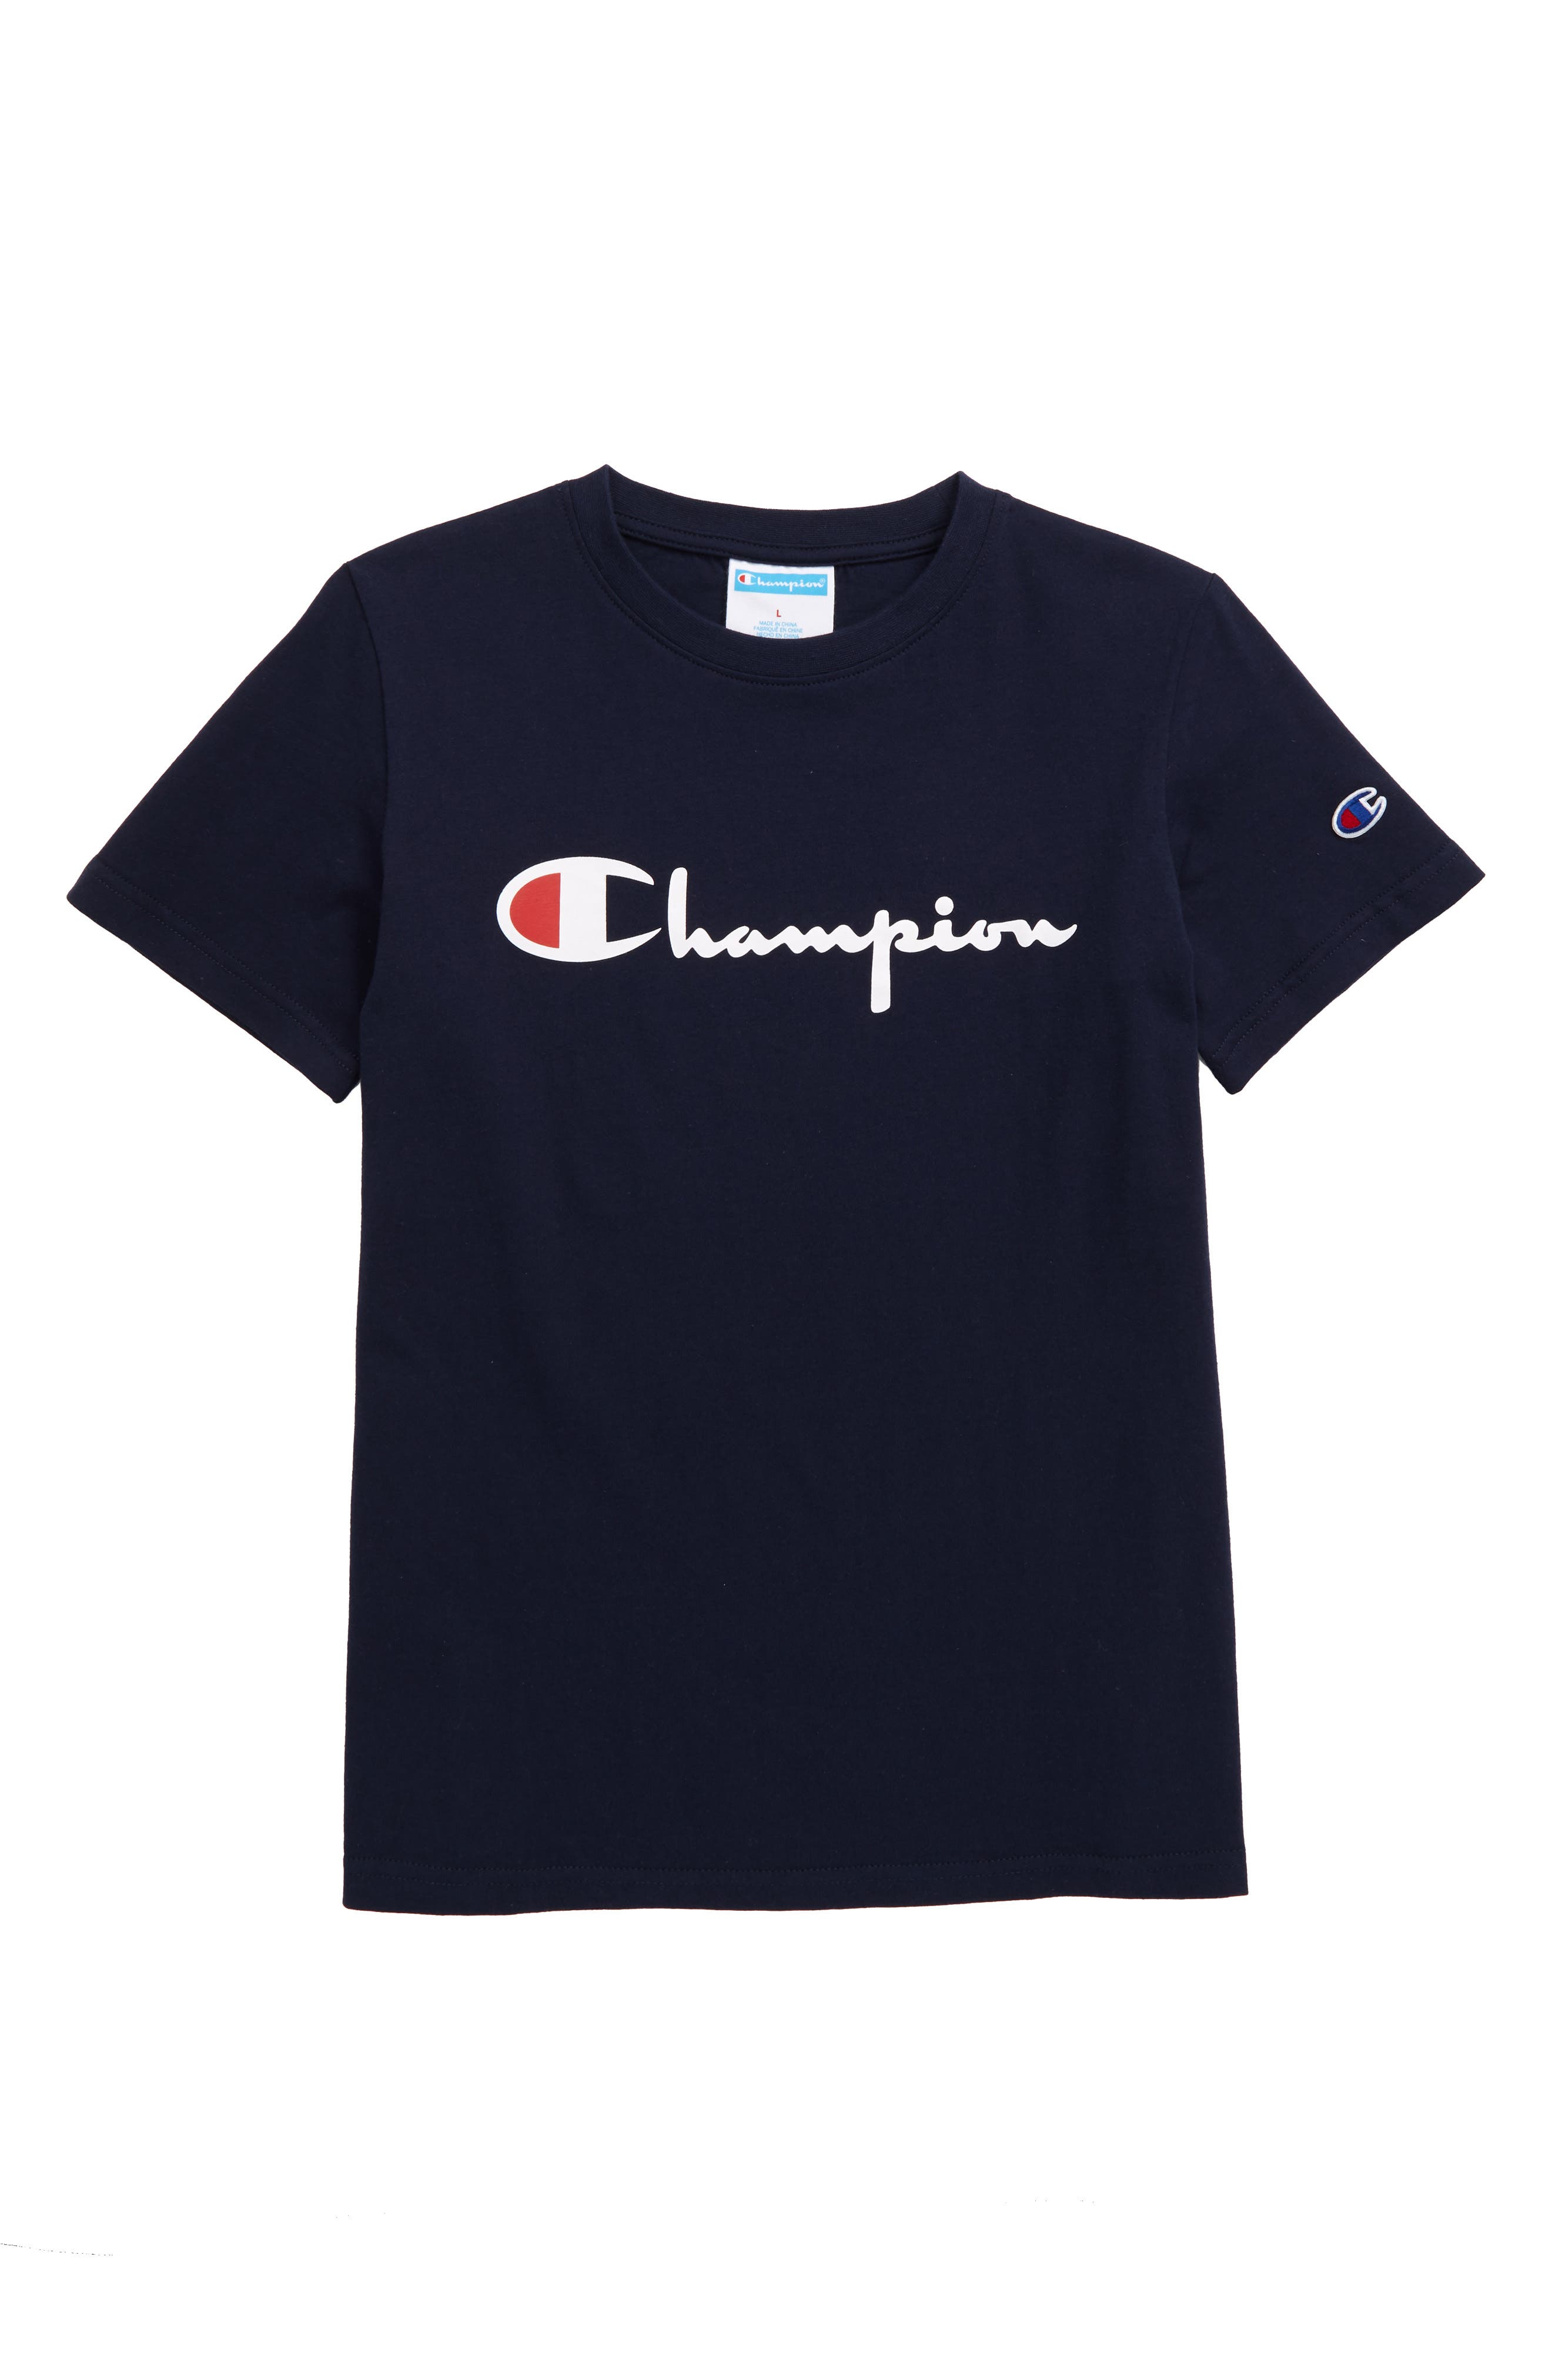 champion outfit for infants